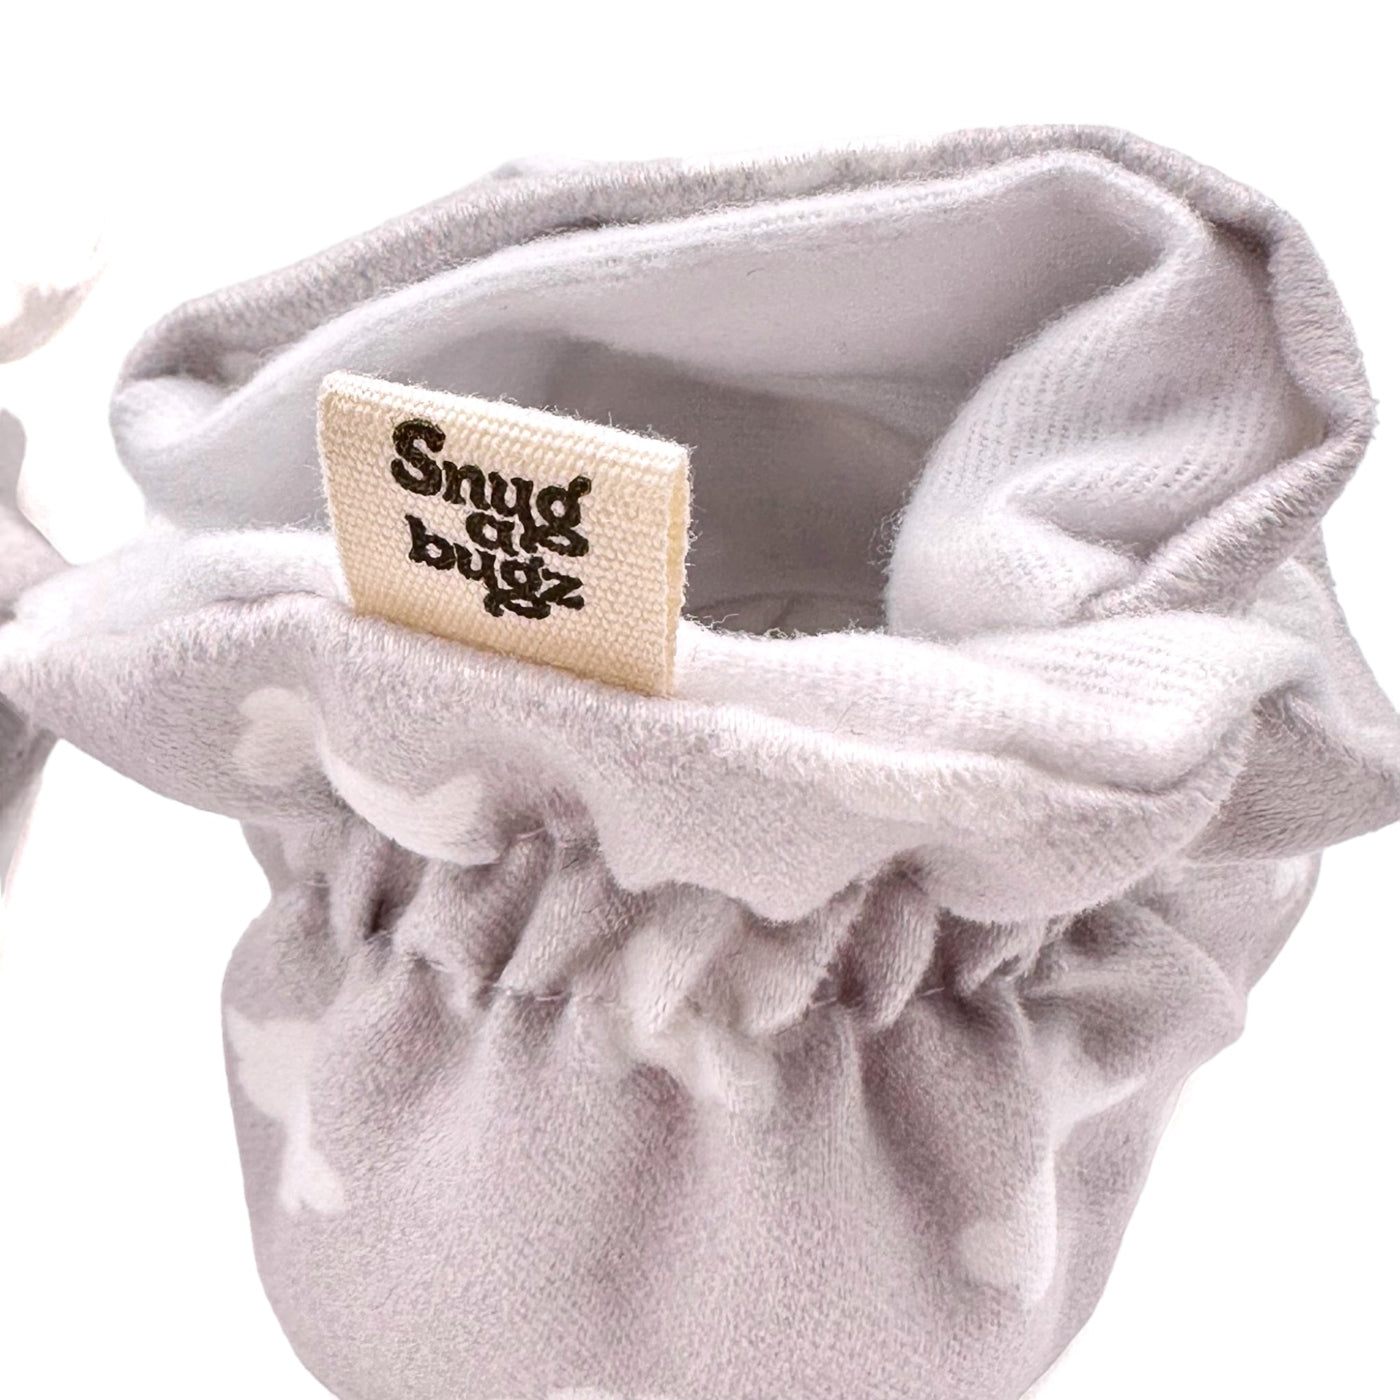 Stay-on, Non-Slip, Baby Booties - Grey Clouds - Snugabugz